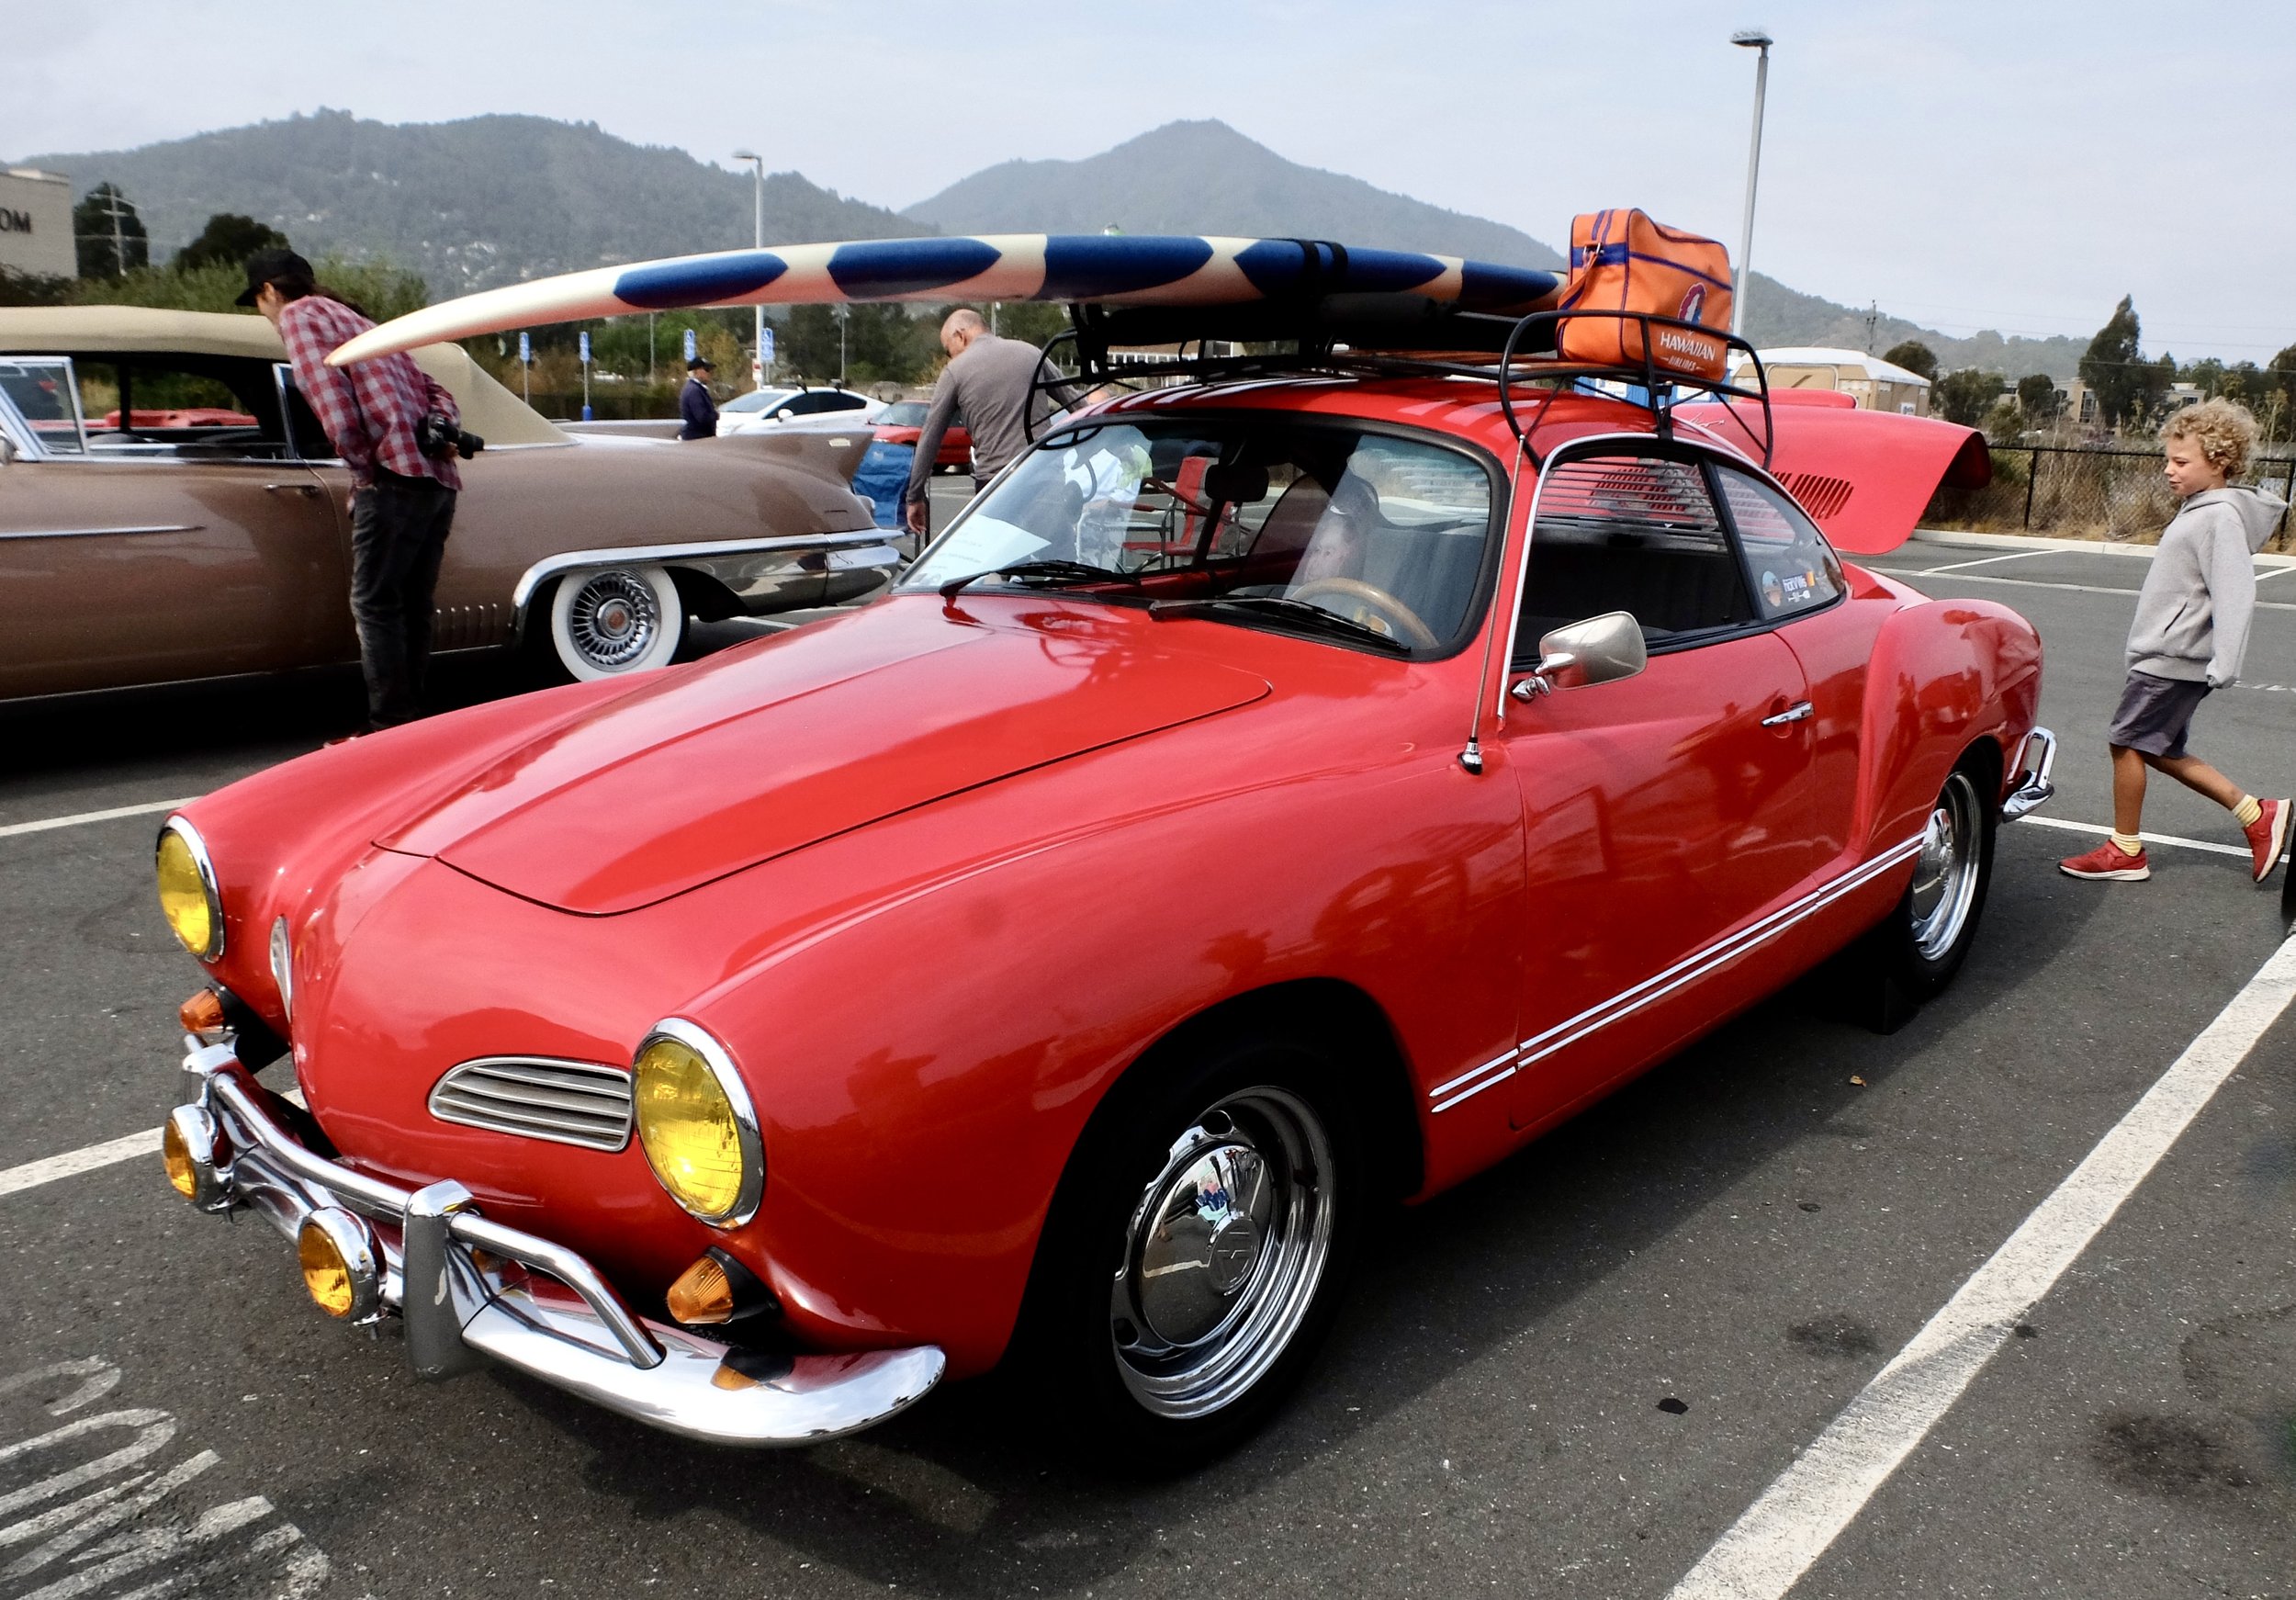 We once had a Karmann Ghia.  It was a 1974 Saturn Yellow roadster.  It wasn't tricked out like this Ghia.